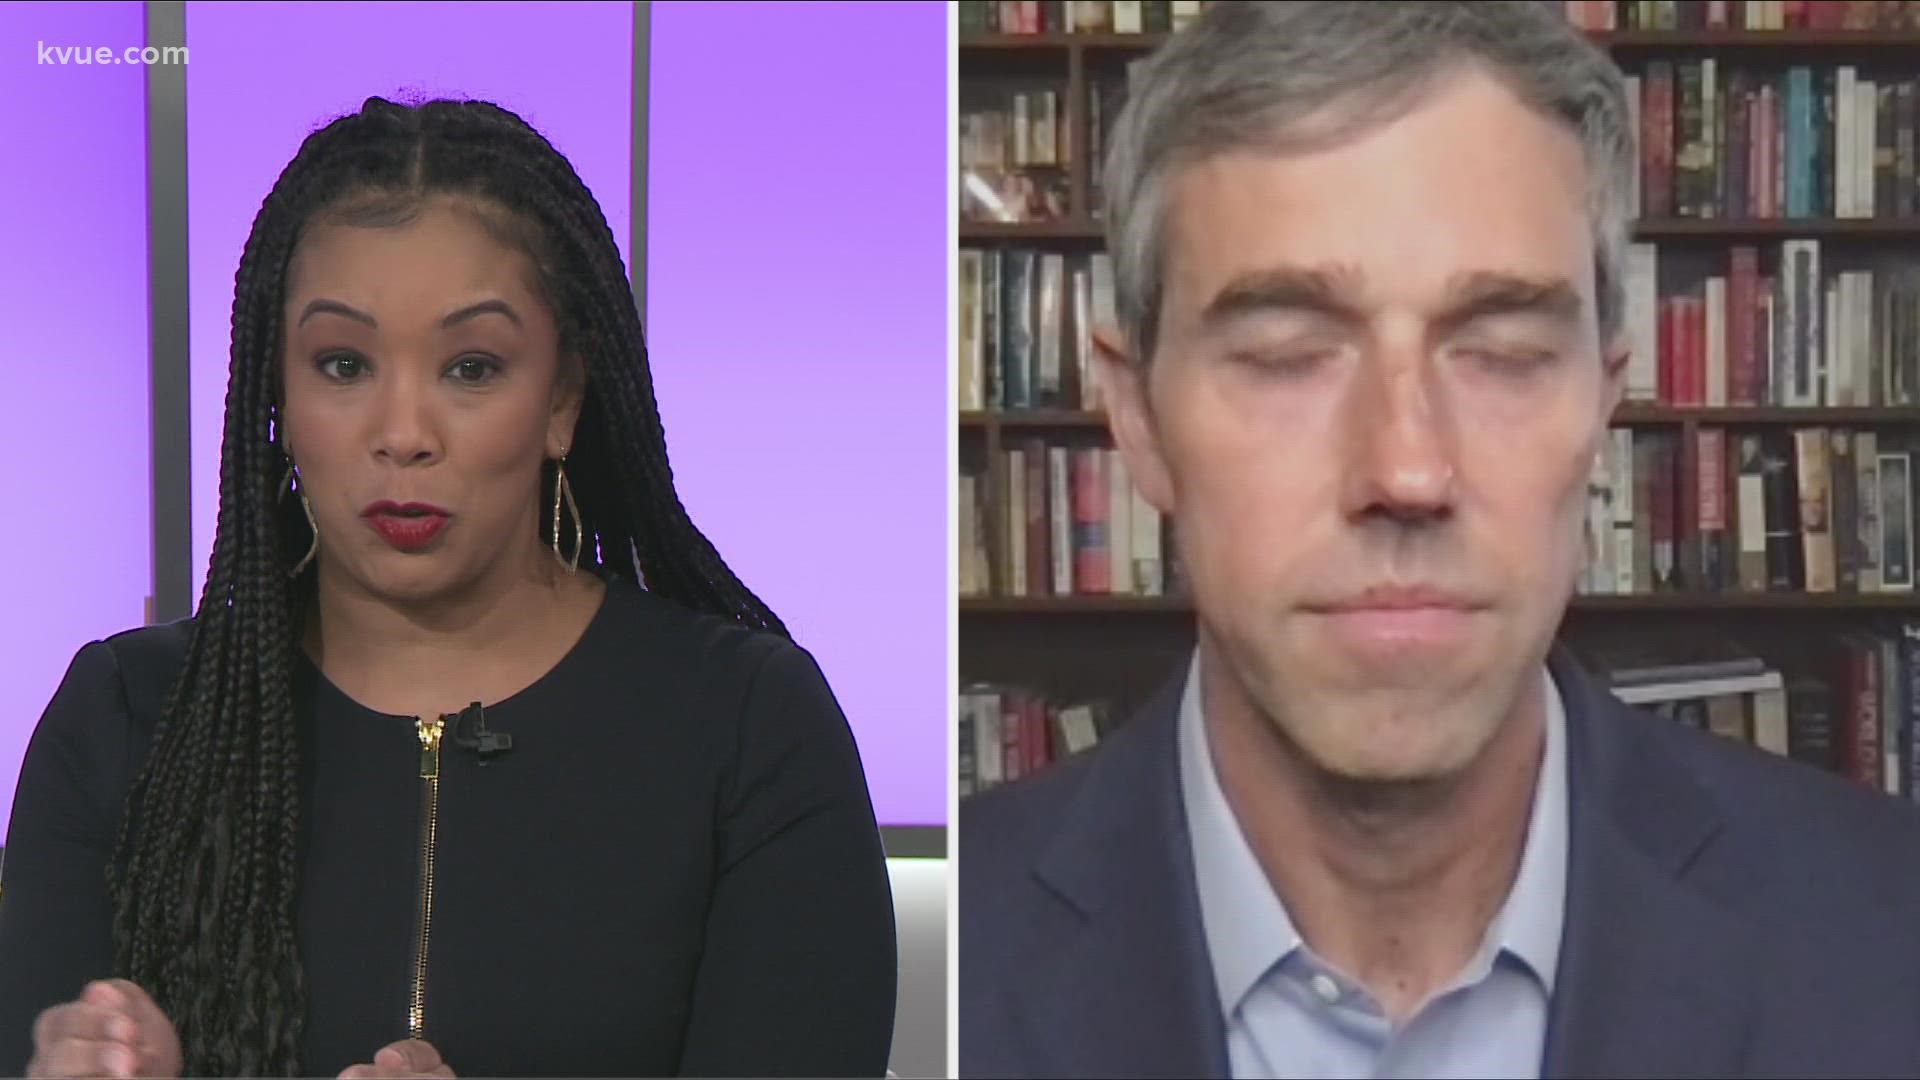 O'Rourke joined KVUE on Monday after announcing his 12-day drive across Texas visiting towns to highlight the one-year anniversary of the state's grid failure.